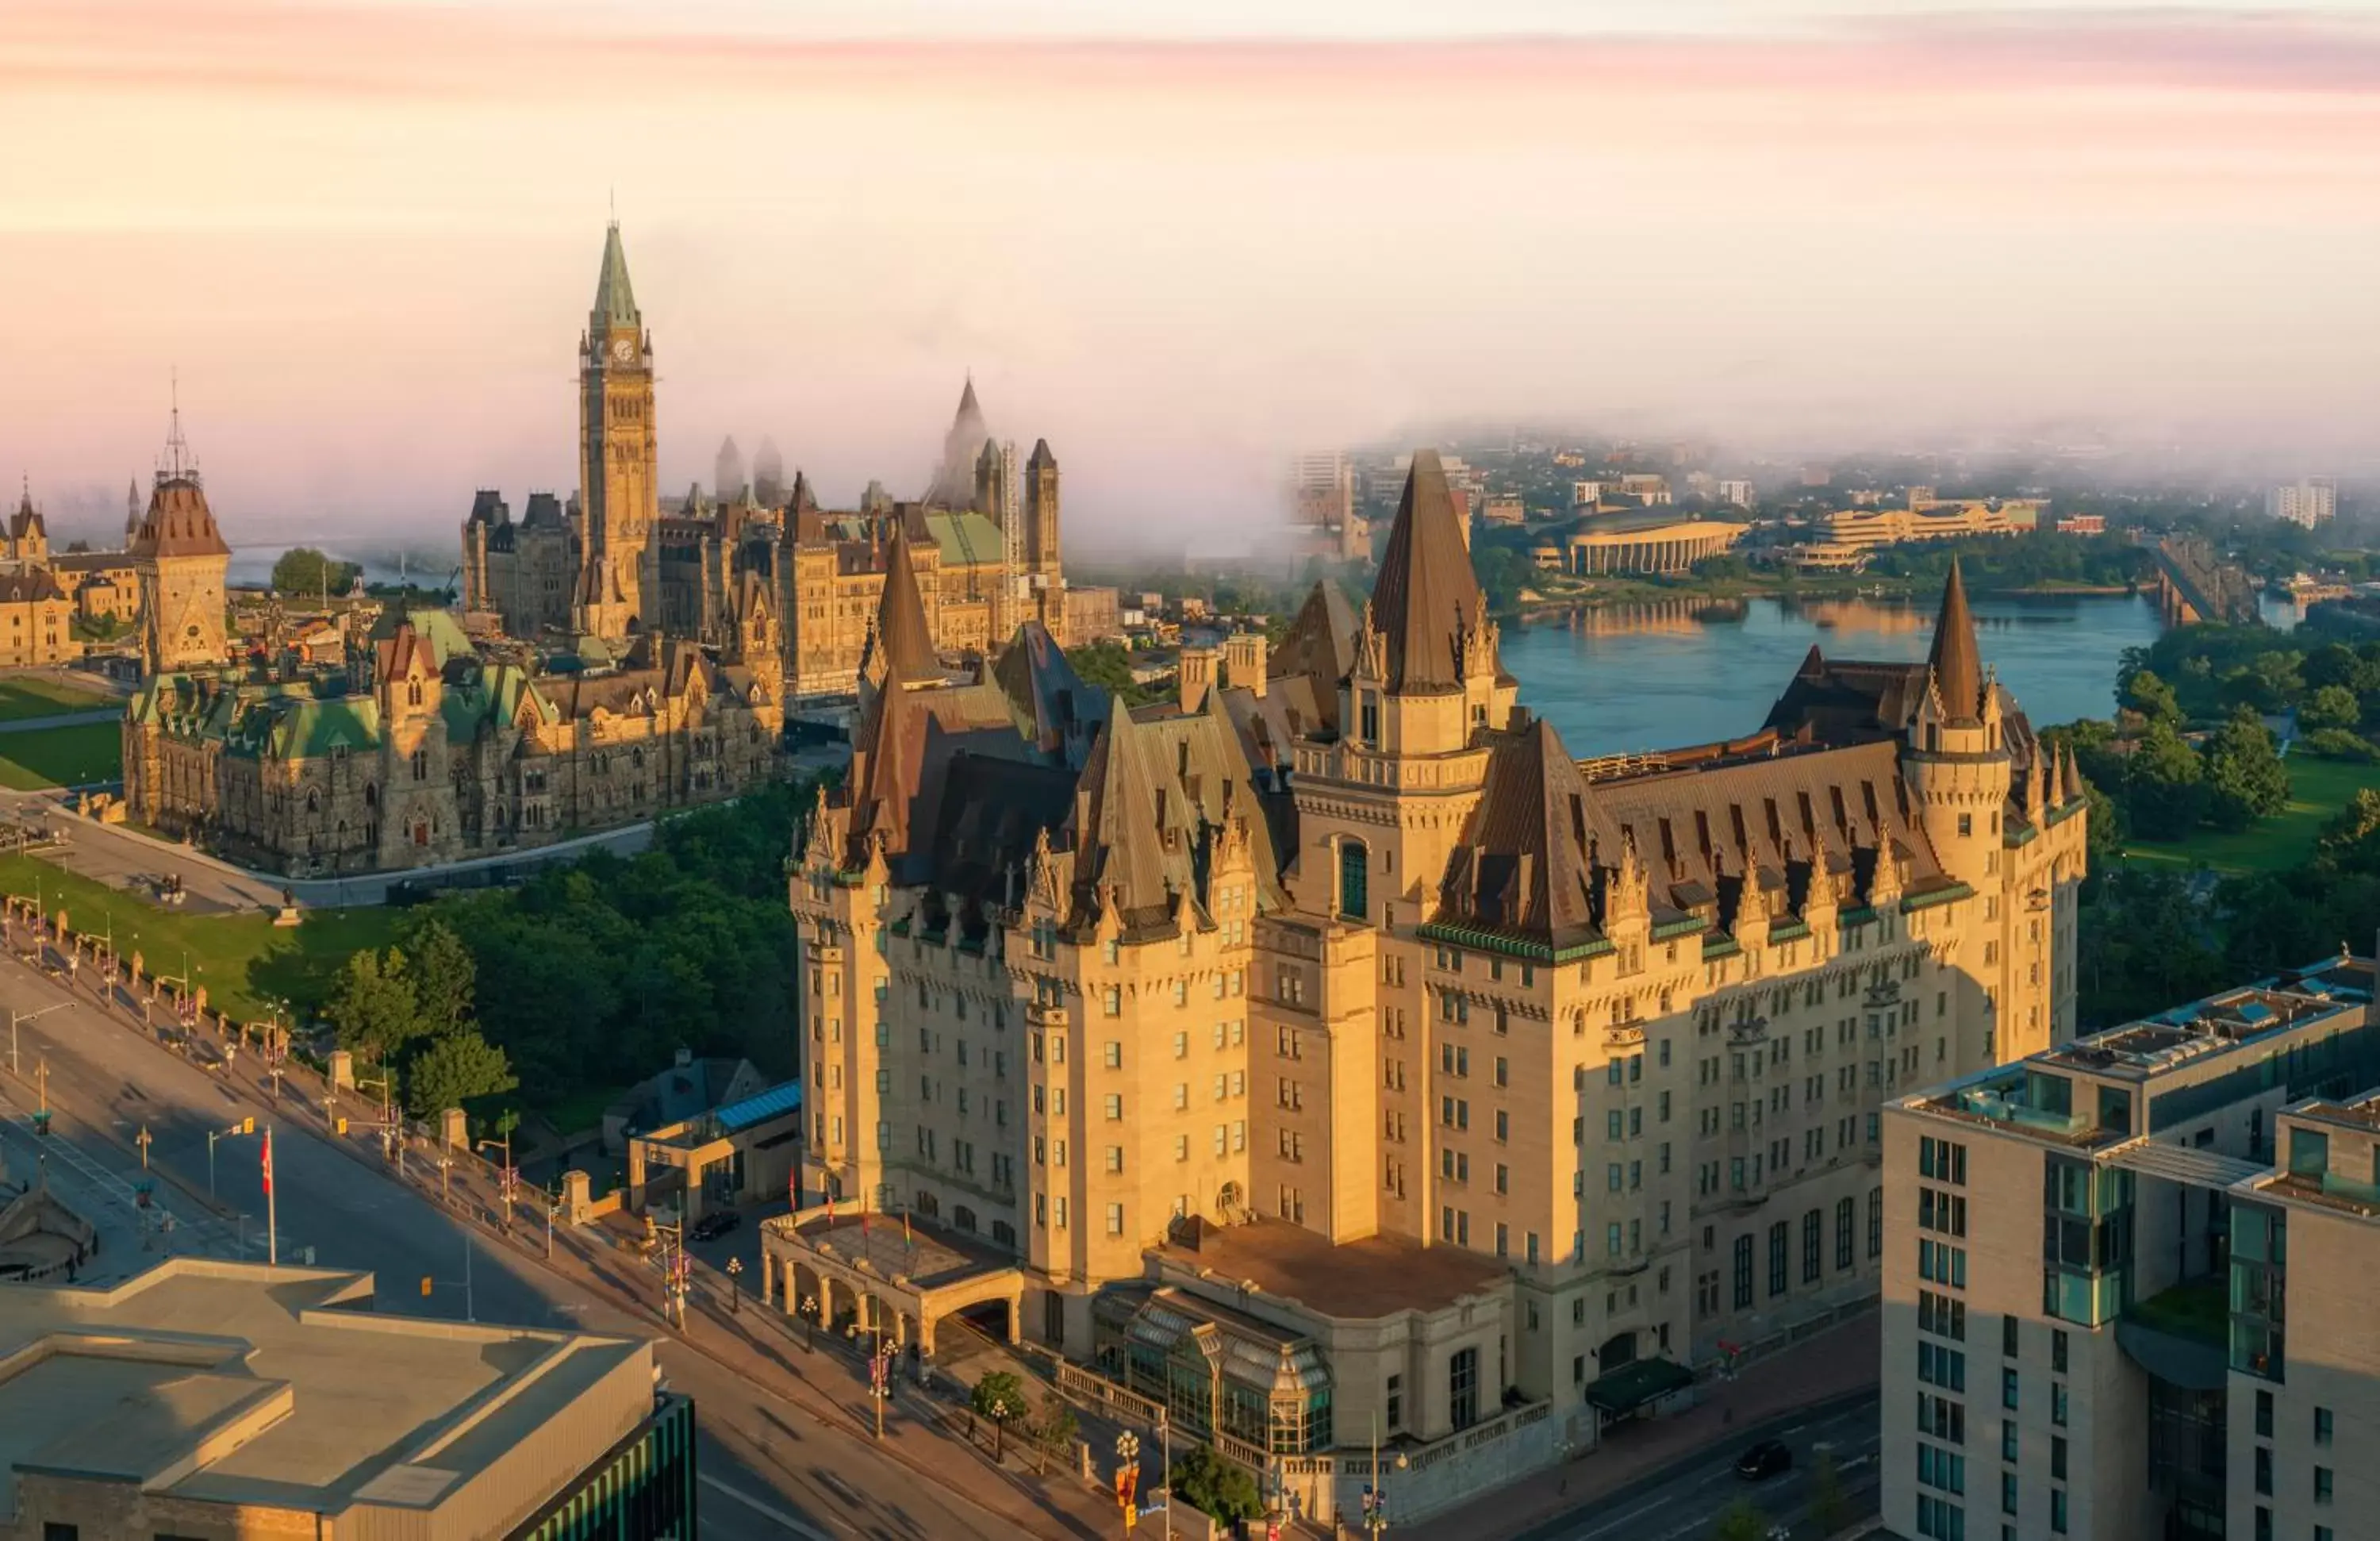 Bird's-eye View in Fairmont Chateau Laurier